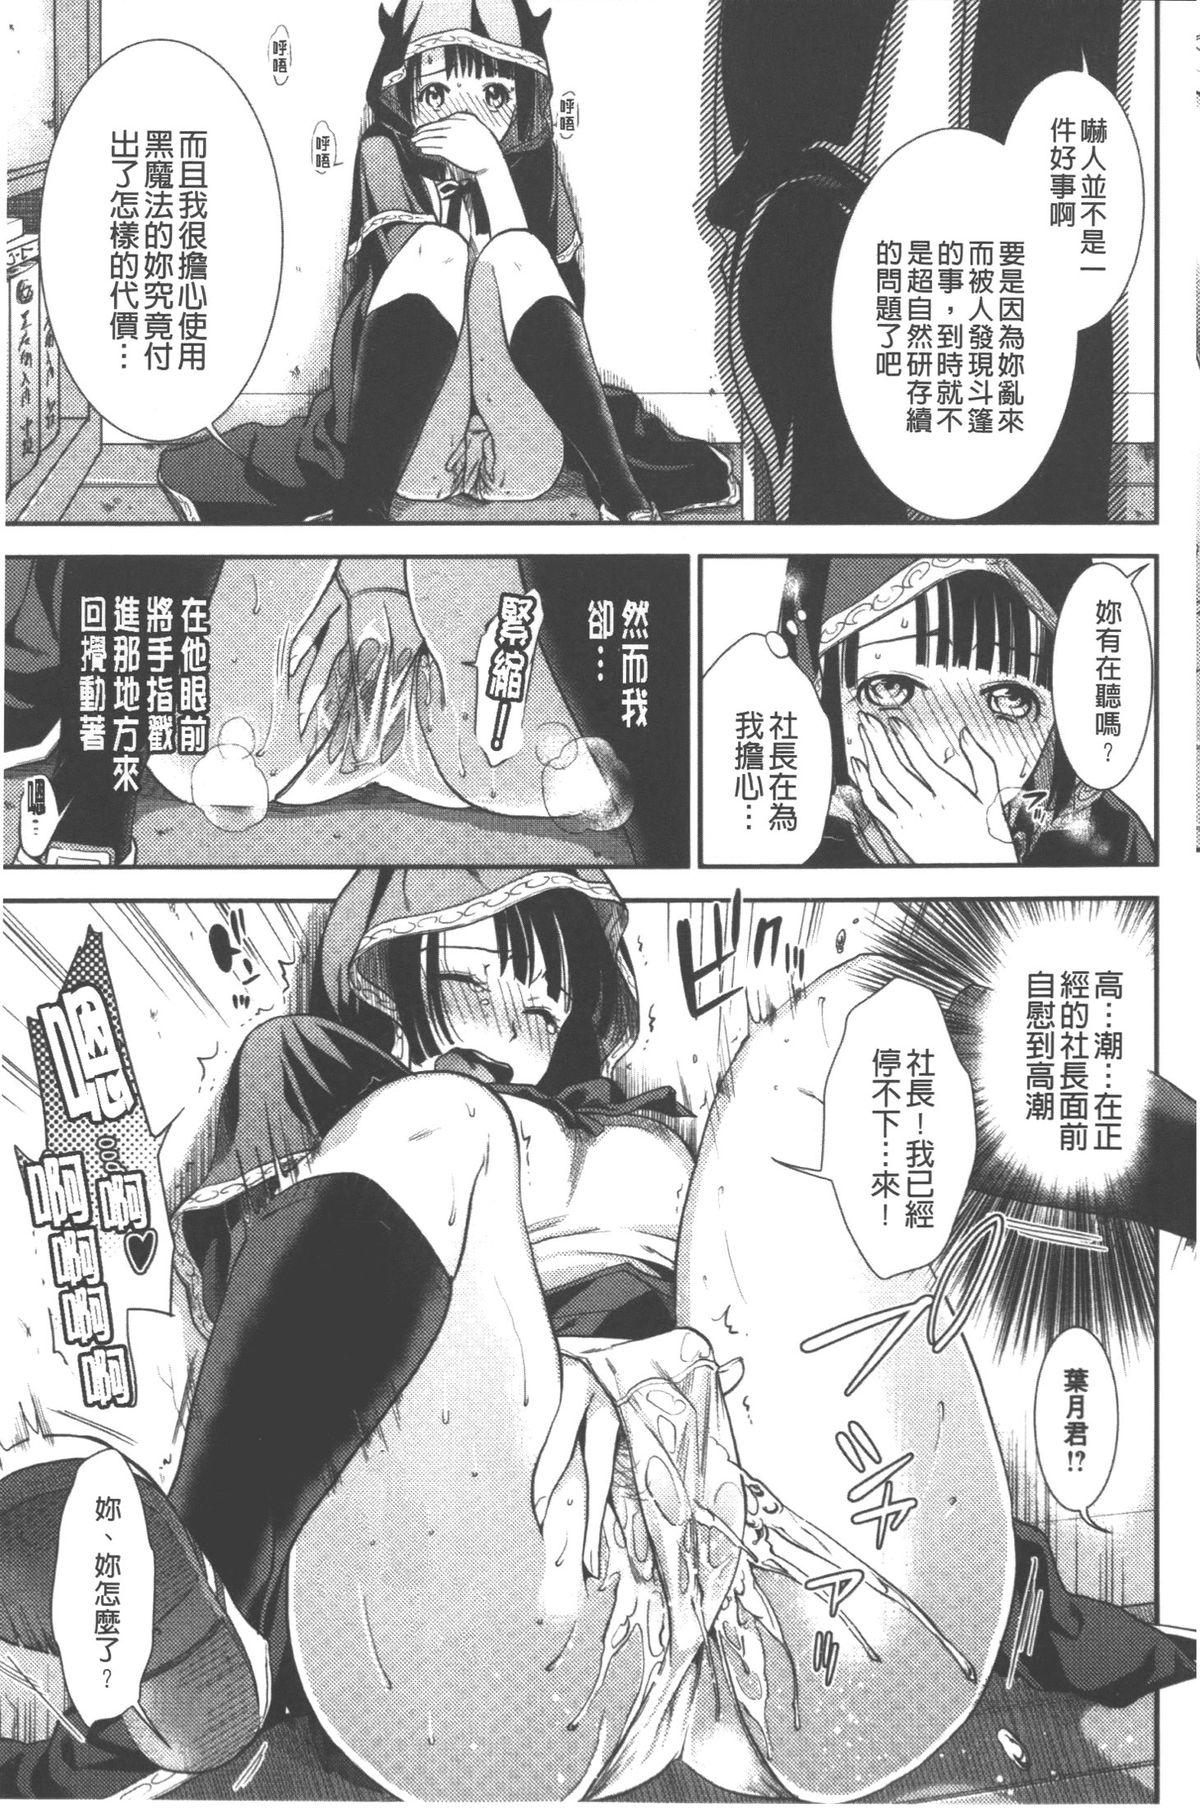 Lesbos Hatsujou no Genri - The Principle of Sexual Excitement Grosso - Page 12